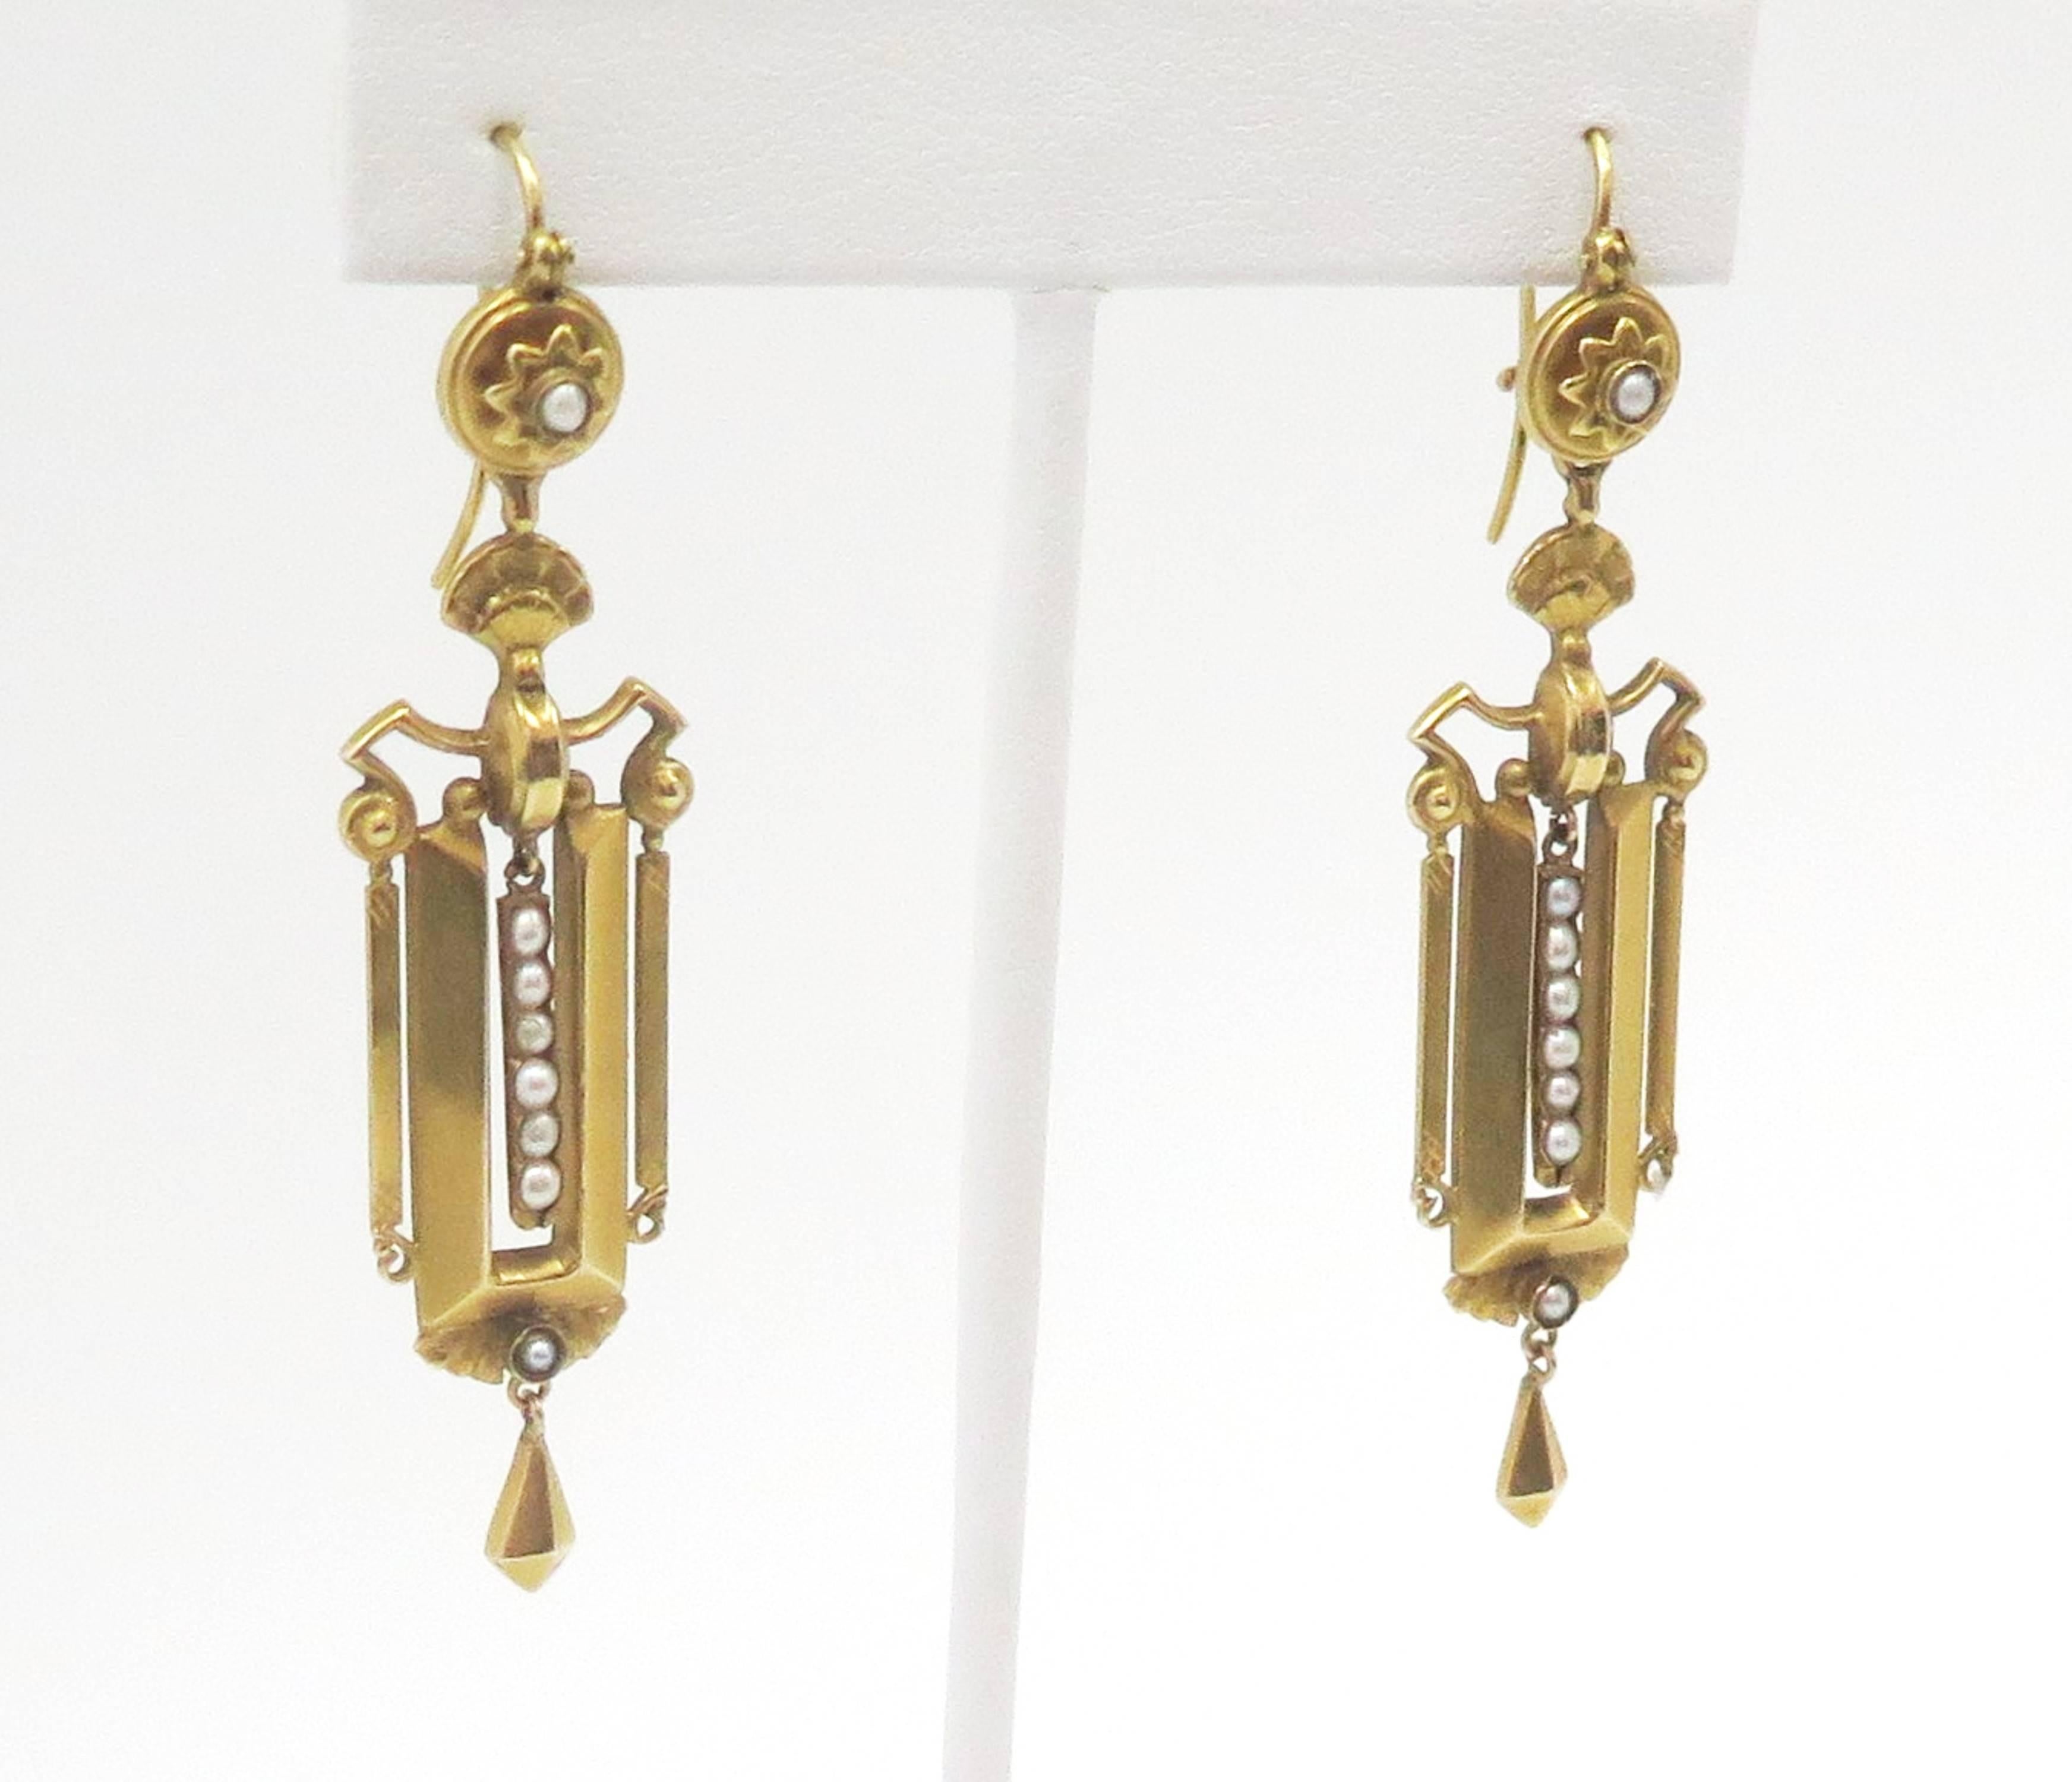 In rich 15K yellow gold, a unique and lovely pair of dangling earrings detailed with delicate pearls. The earrings are geometrically inspired yet softened with  lustrous seed pearls that shimmer down the middle. The center piece dangles gracefully